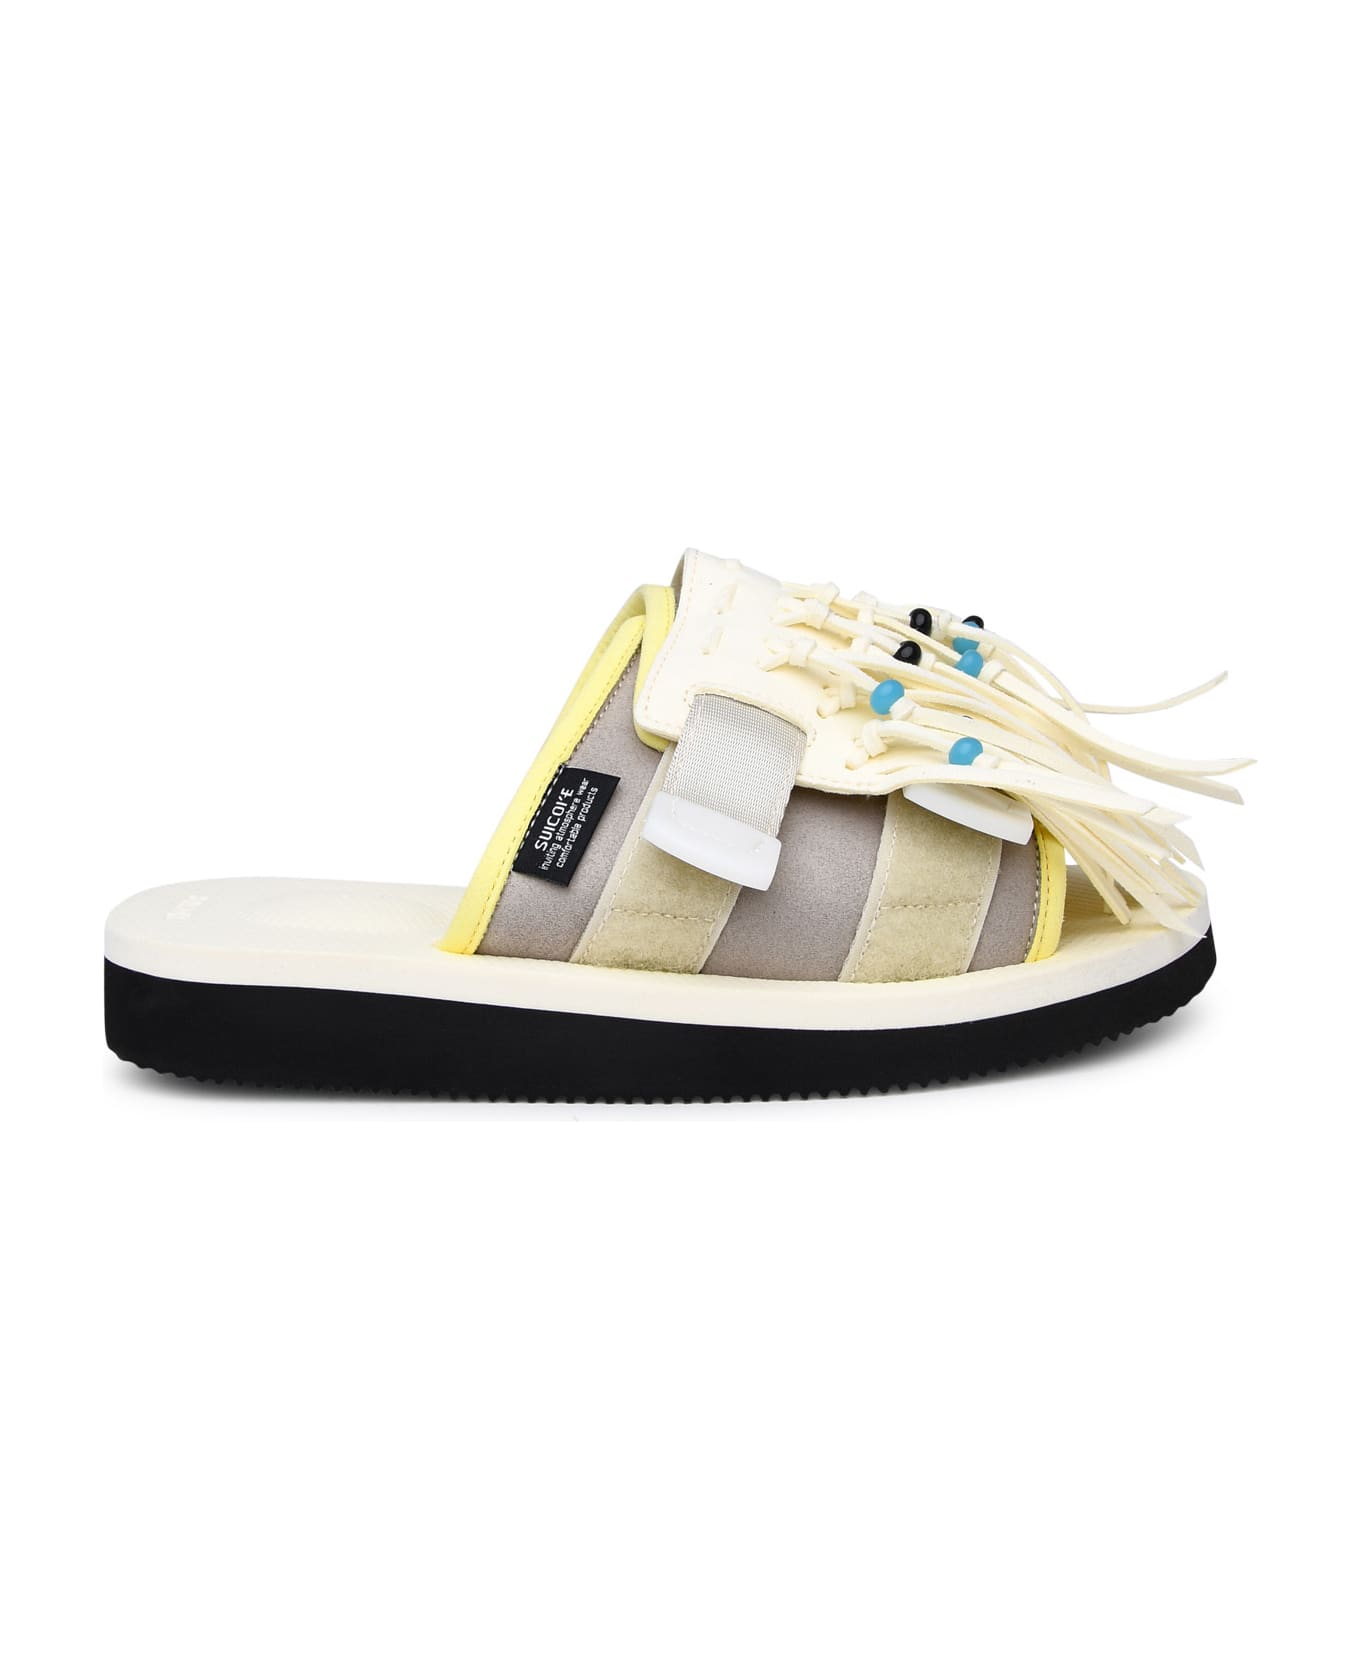 SUICOKE Hoto Cab Slipper In Ivory Synthetic Leather - White